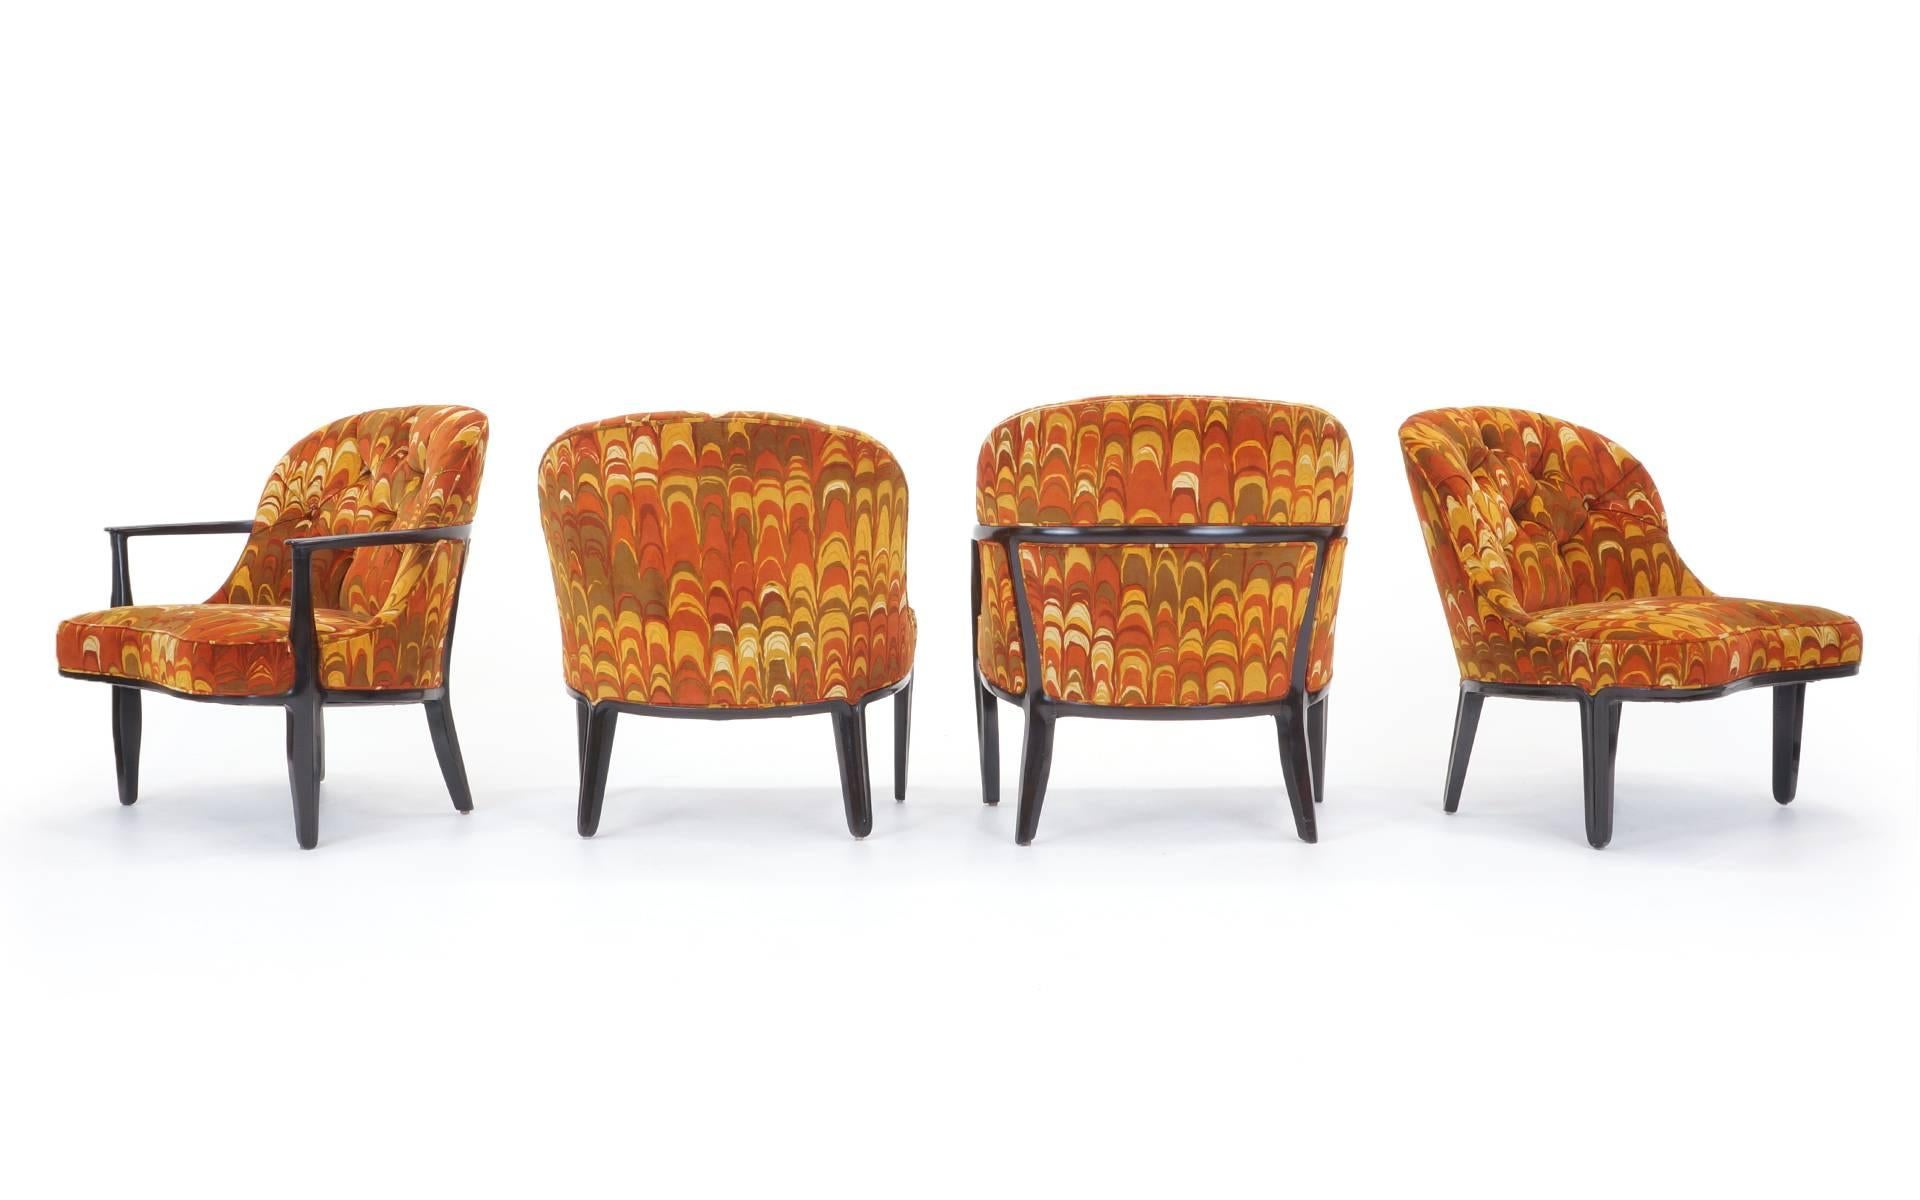 Rare set of four Janus chairs, two armchairs and two armless chairs, in the original and amazing Jack Lenor Larsen orange patterned fabric. Condition overall is excellent. The foam in the armless chairs is stiffer than the armchairs, but not